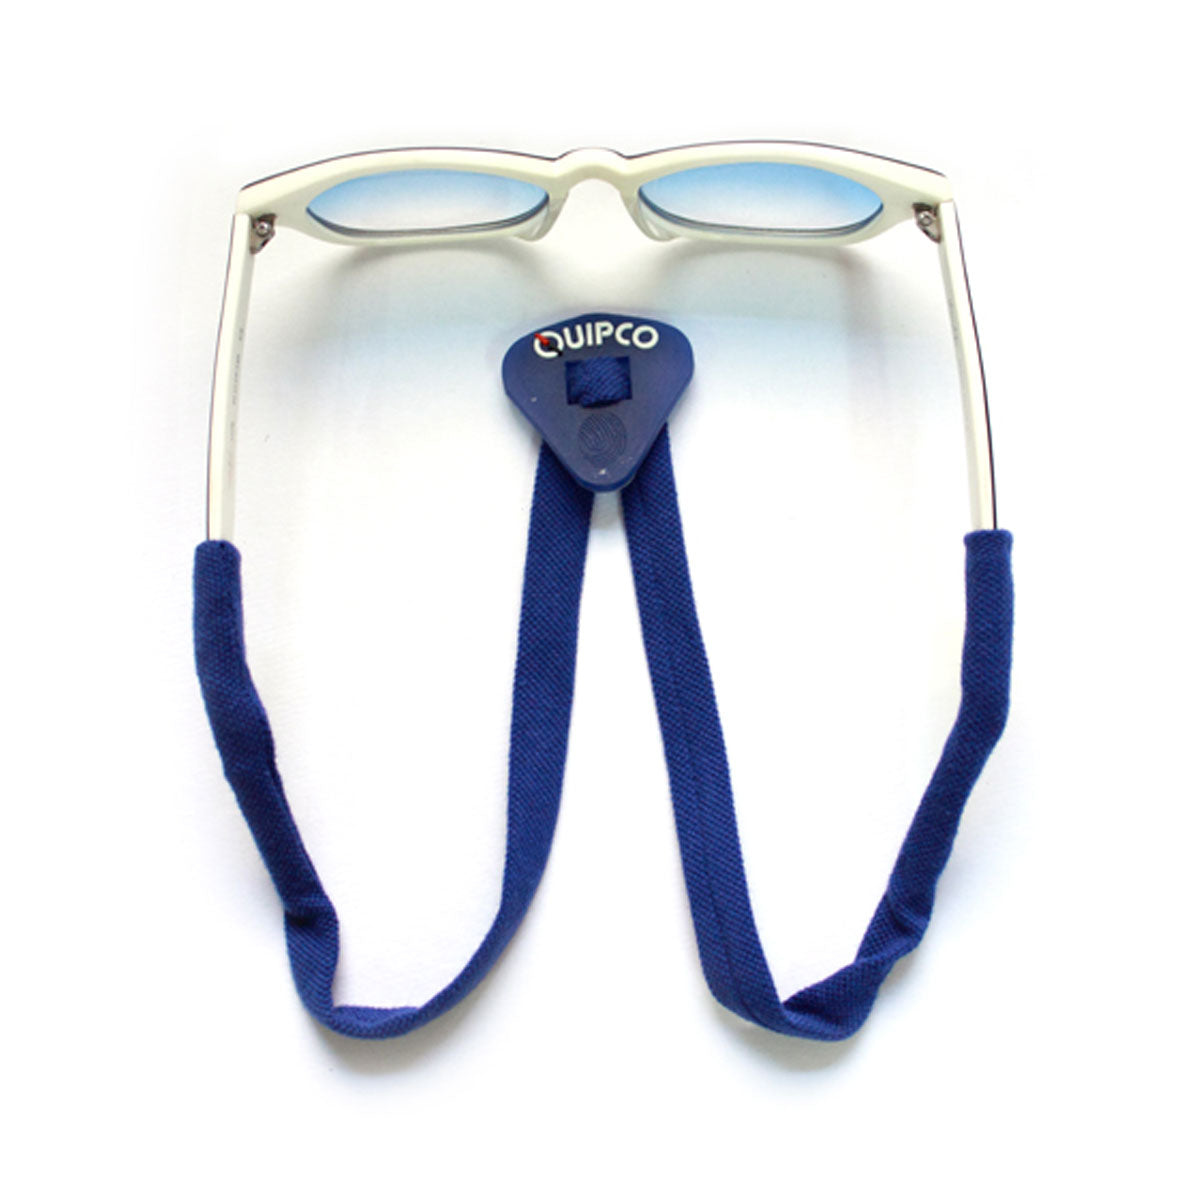 Quipco Eyesecure Goggle Band - Royal Blue 2